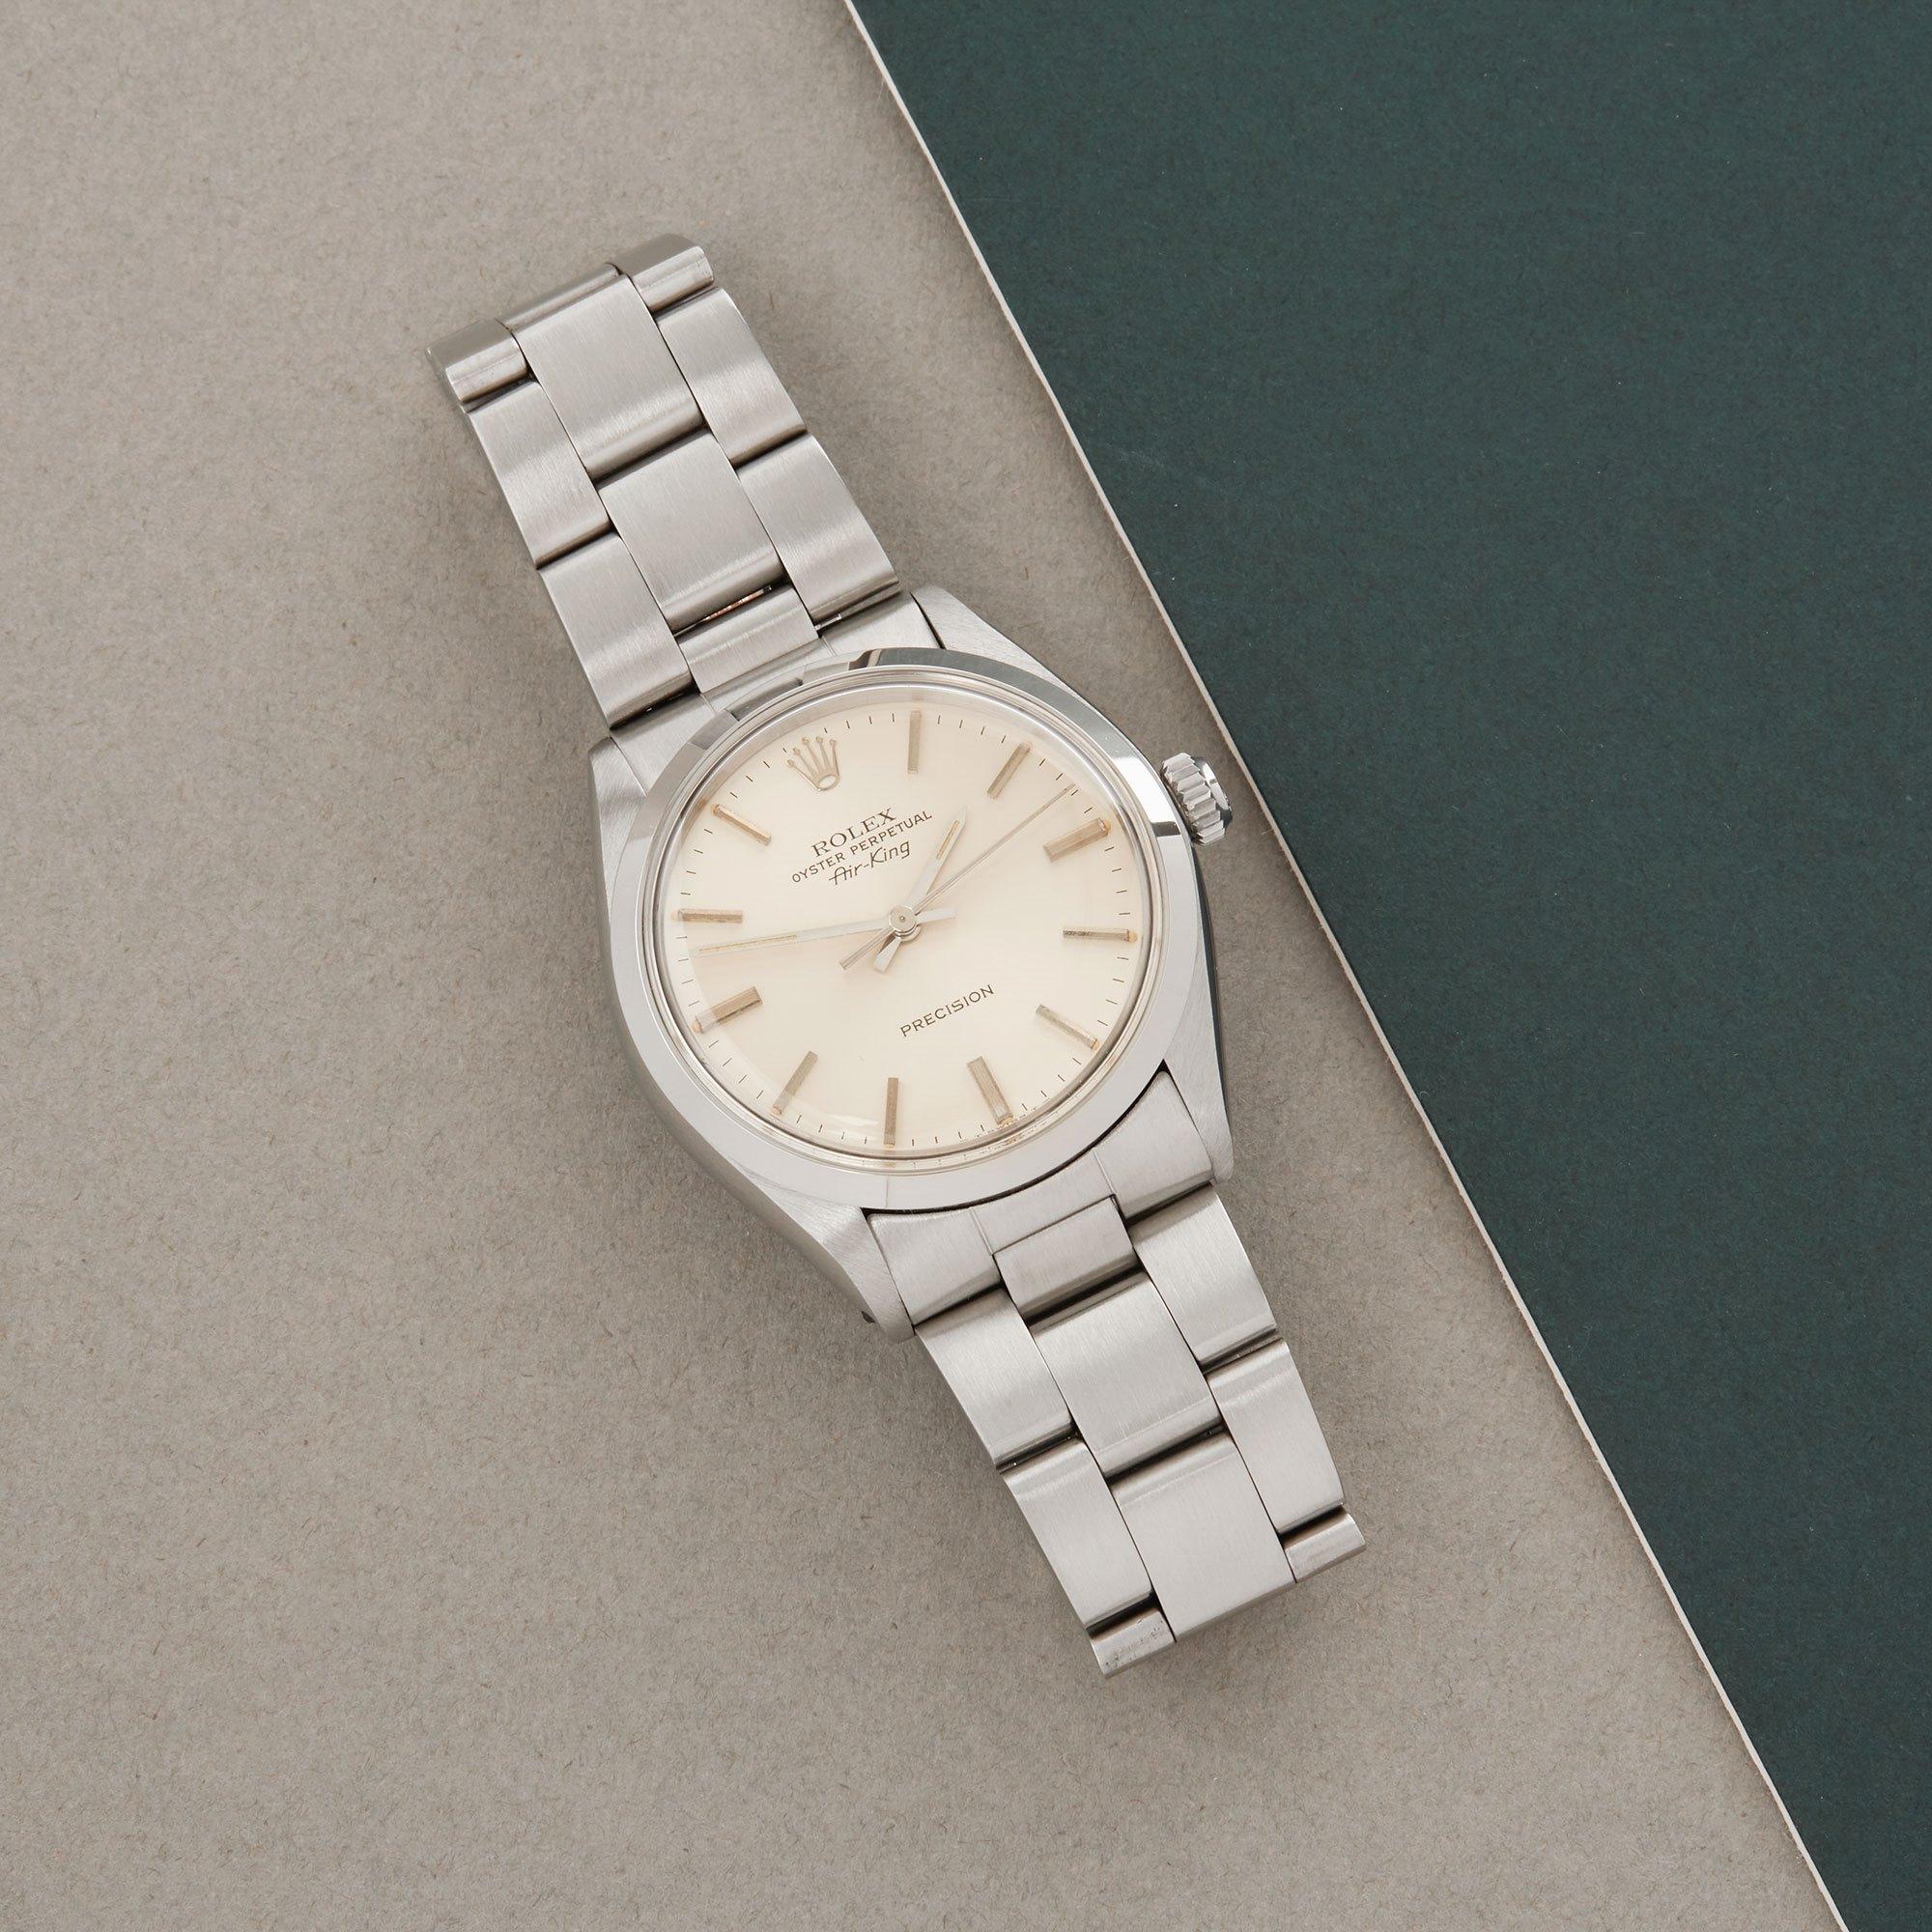 Xupes Reference: W007637
Manufacturer: Rolex
Model: Air-King
Model Variant: 0
Model Number: 5500
Age: 1978
Gender: Men
Complete With: Rolex Box & Service Pouch 
Dial: Silver Baton
Glass: Plexiglass
Case Size: 34mm
Case Material: Stainless